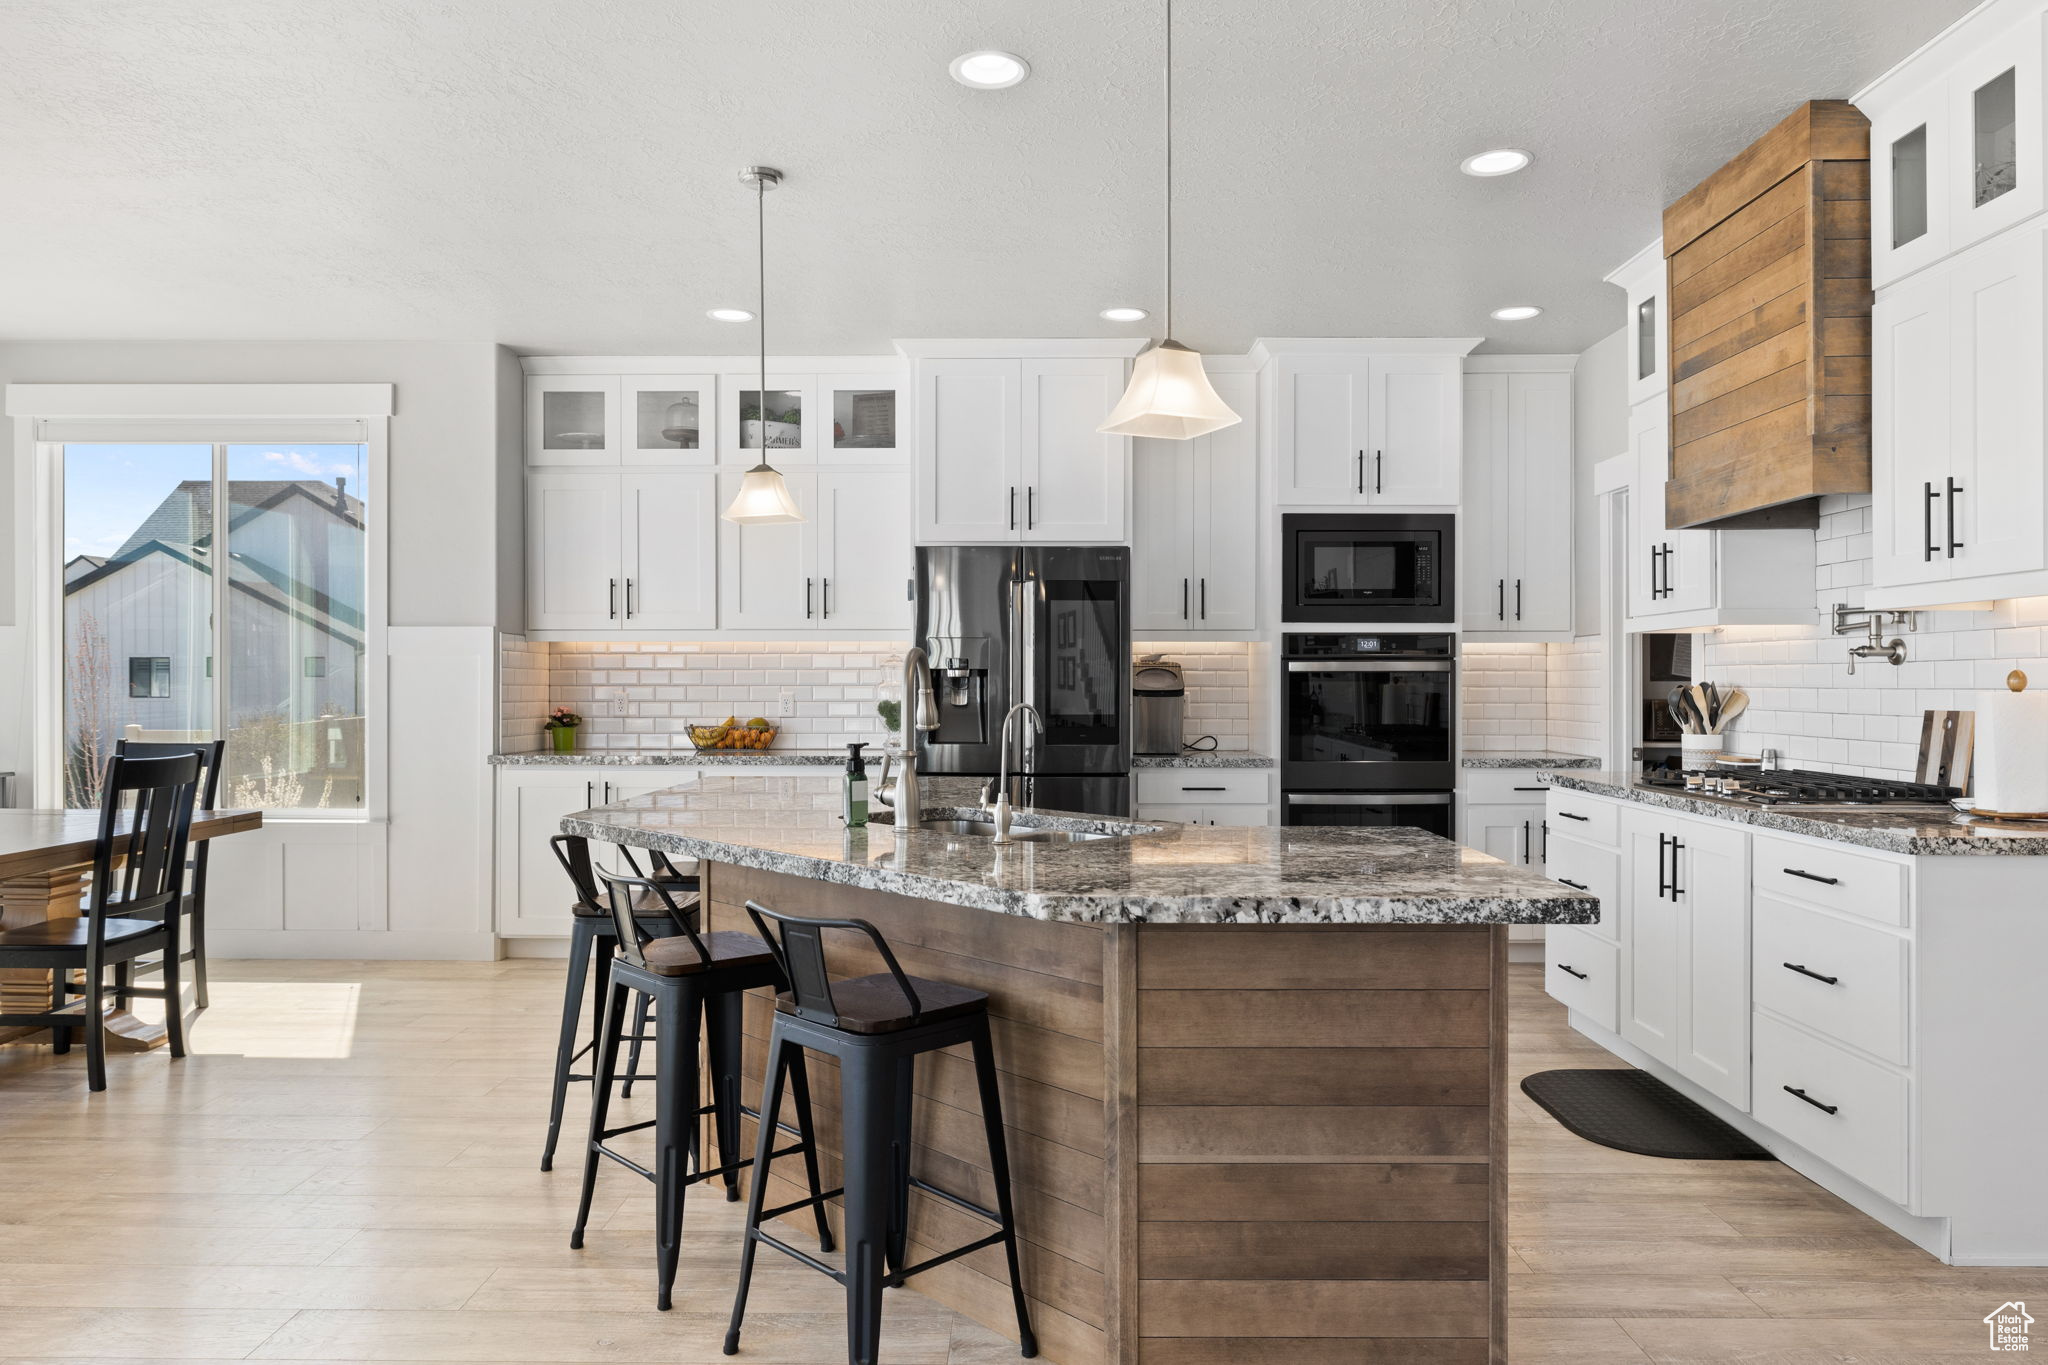 Kitchen with white cabinets, backsplash, an island with sink, and black appliances